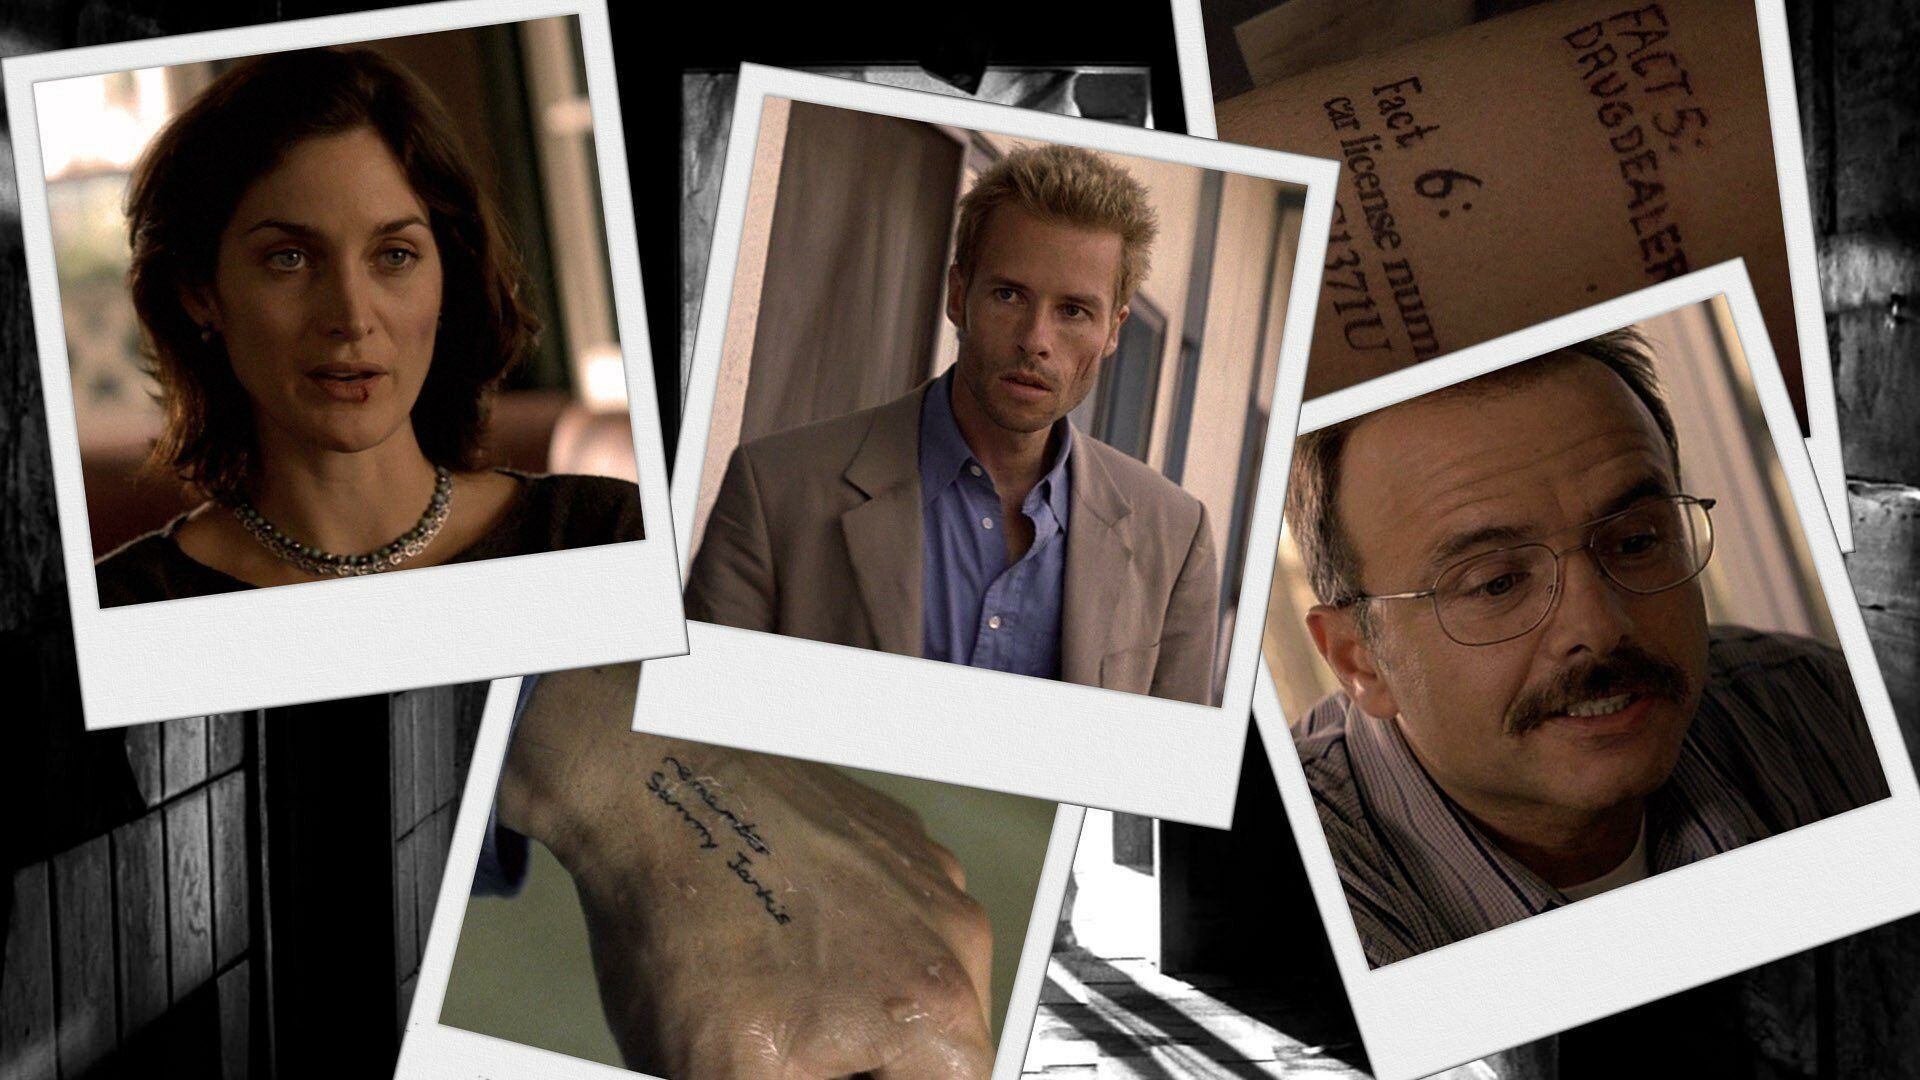 Memento: Carrie-Anne Moss and Joe Pantoliano were the co-stars of the film. 1920x1080 Full HD Background.